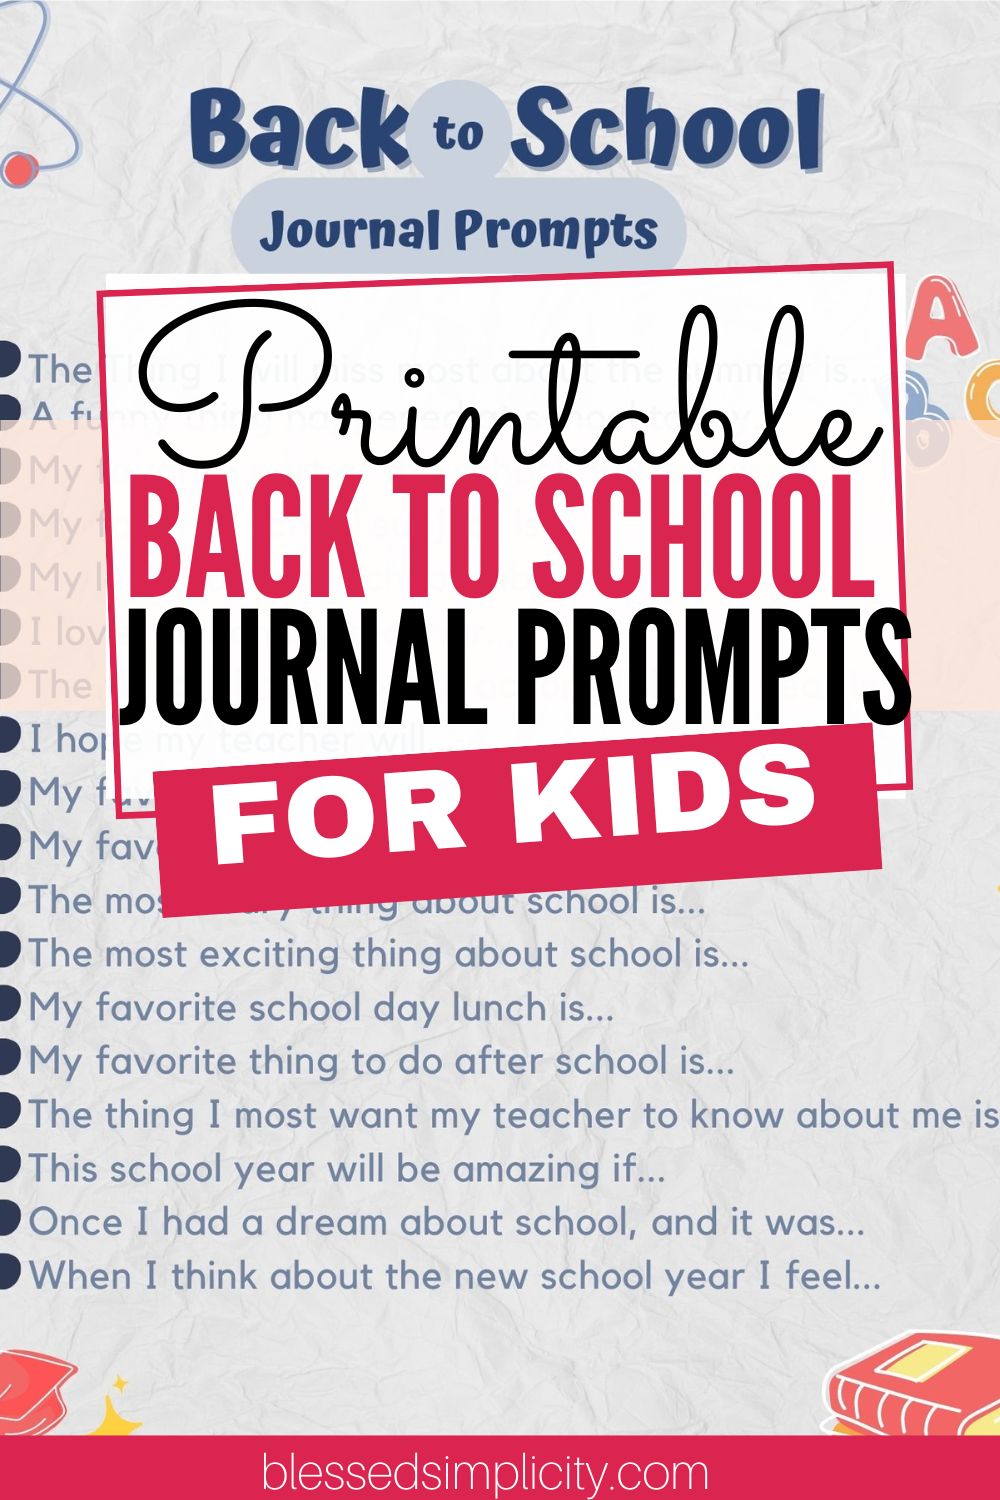 Back to School Journal Prompts for Kids